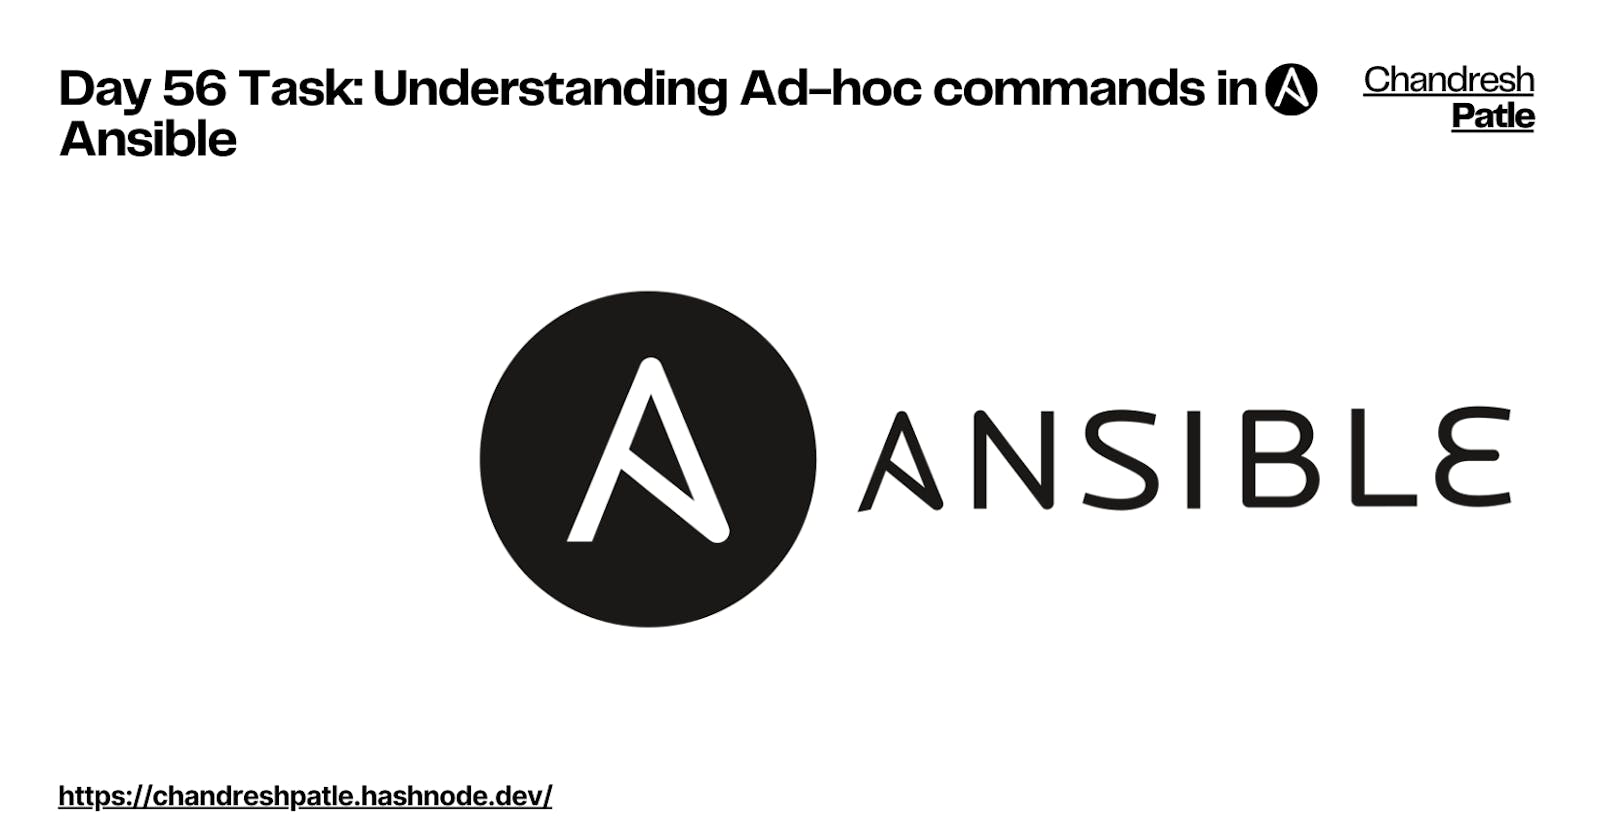 Day 56 Task: Understanding Ad-hoc commands in Ansible